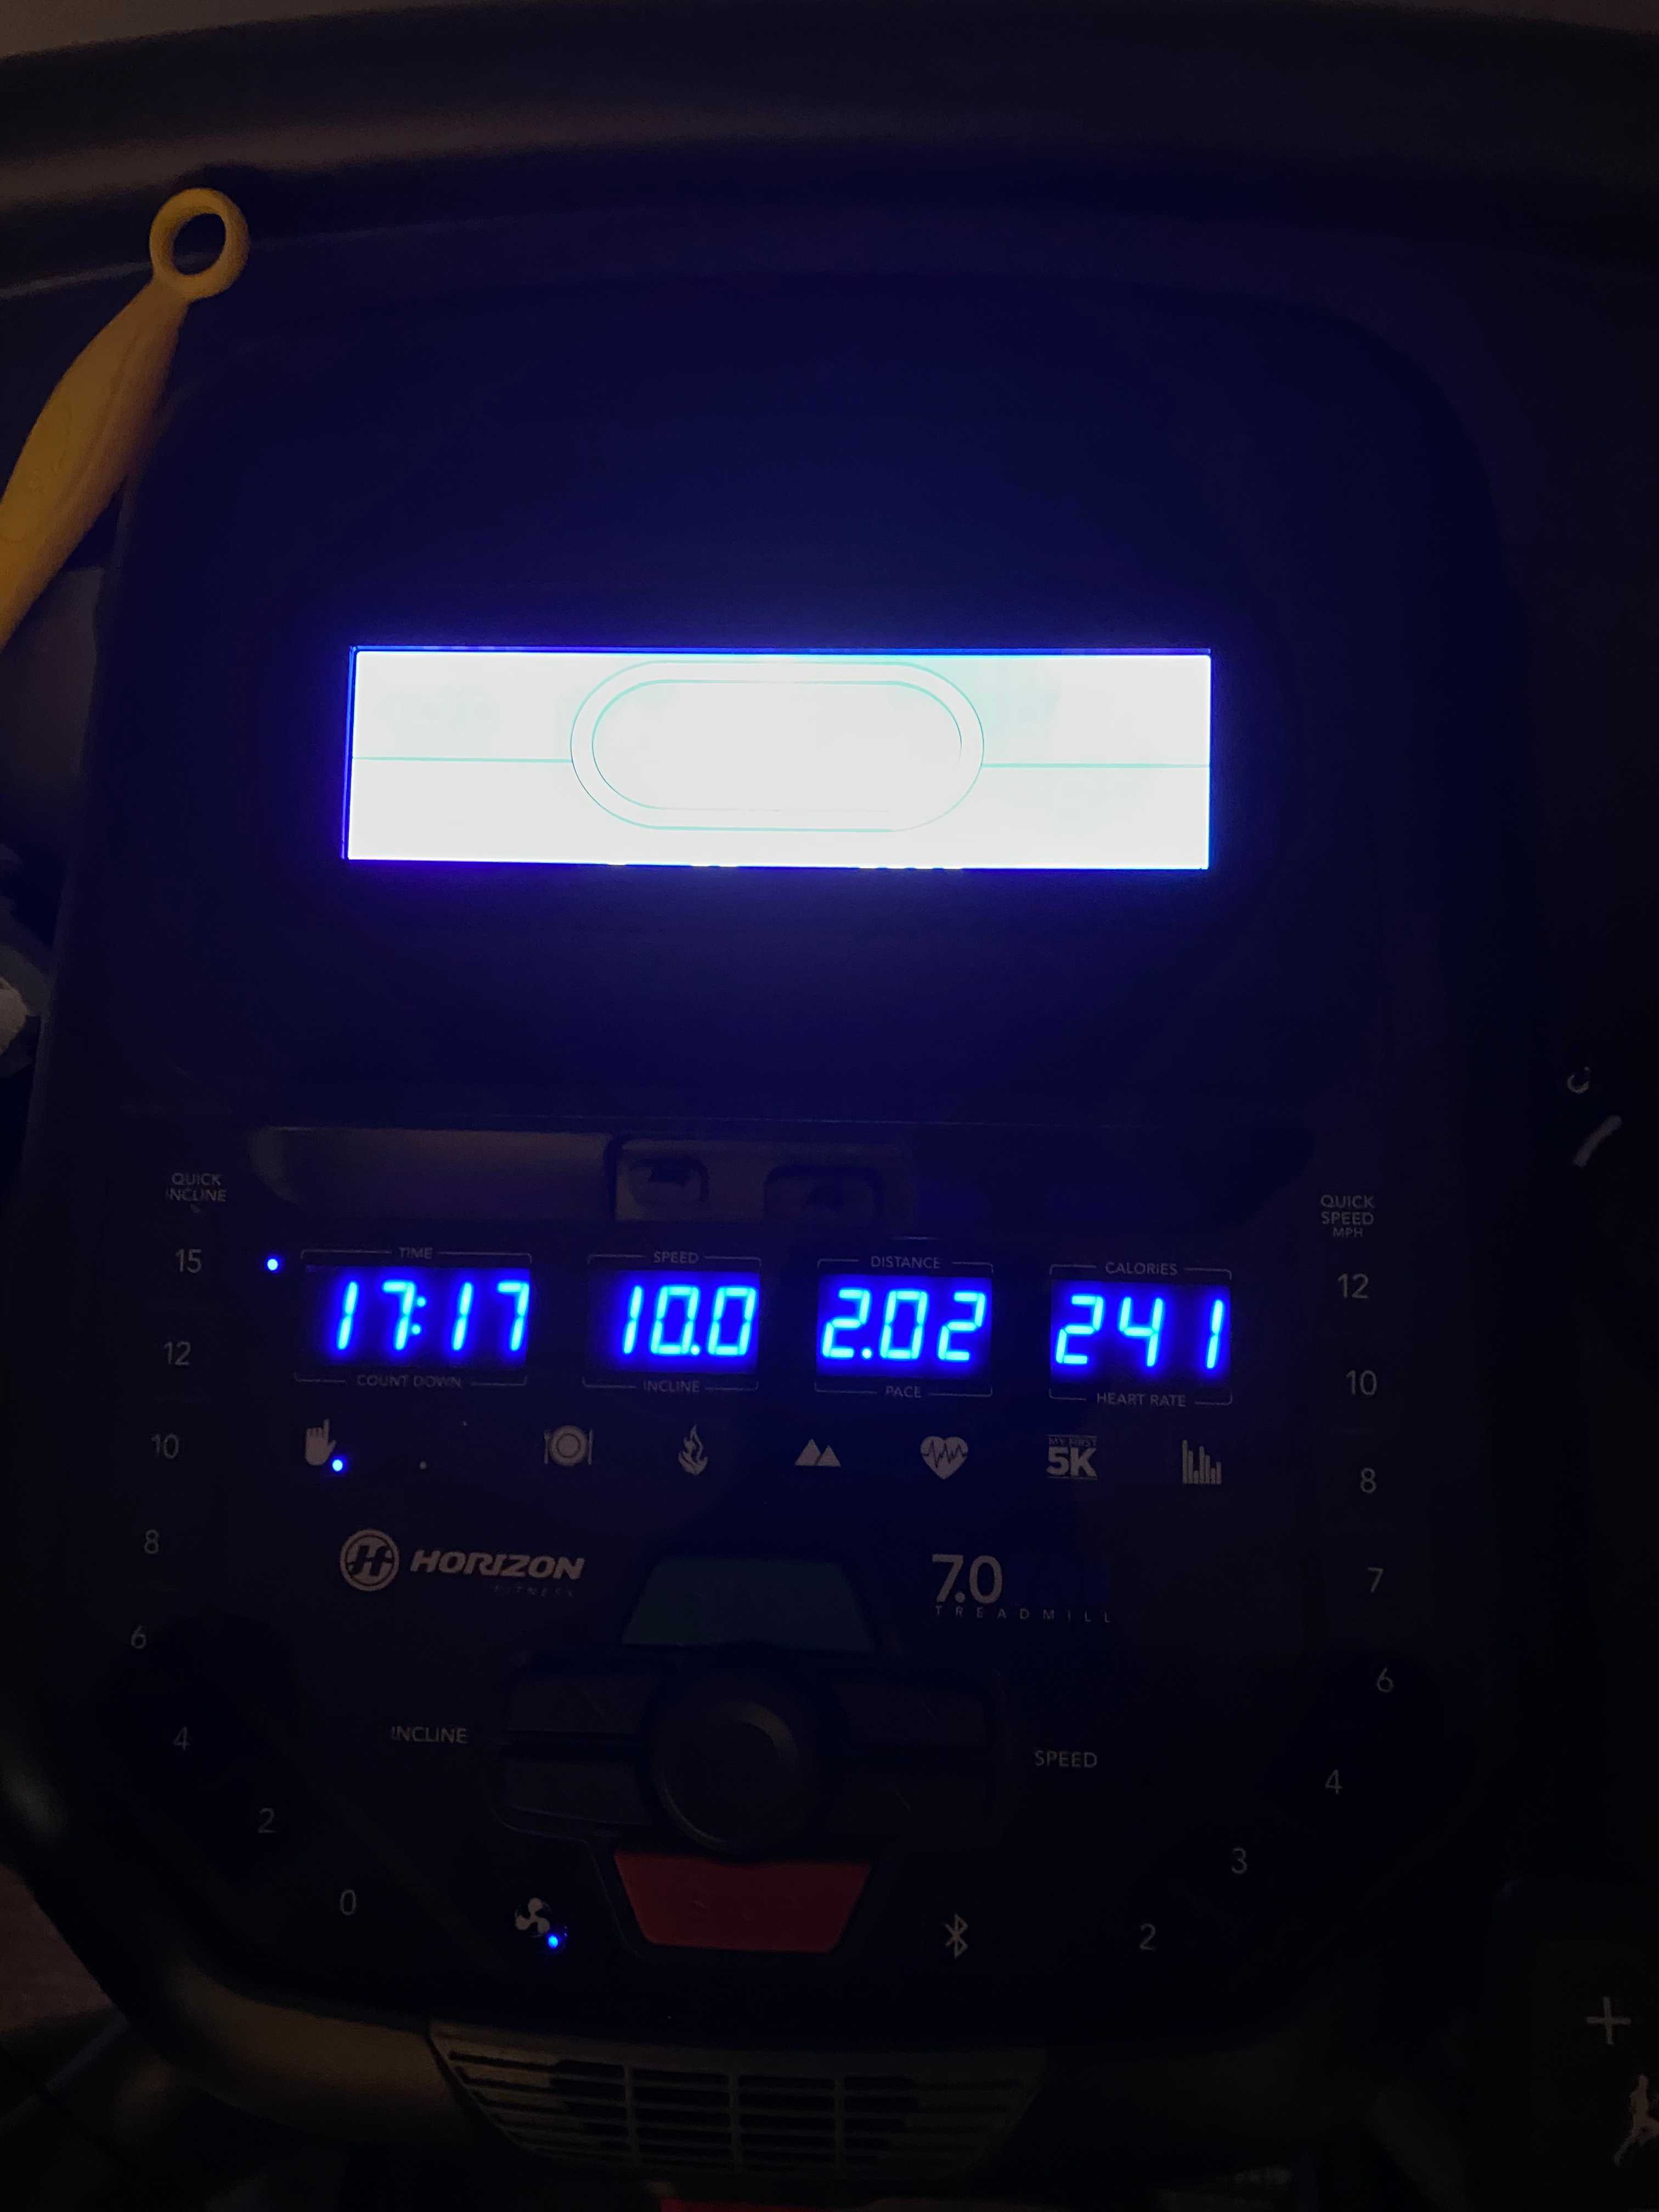 A full minute off my best 2 mile time!